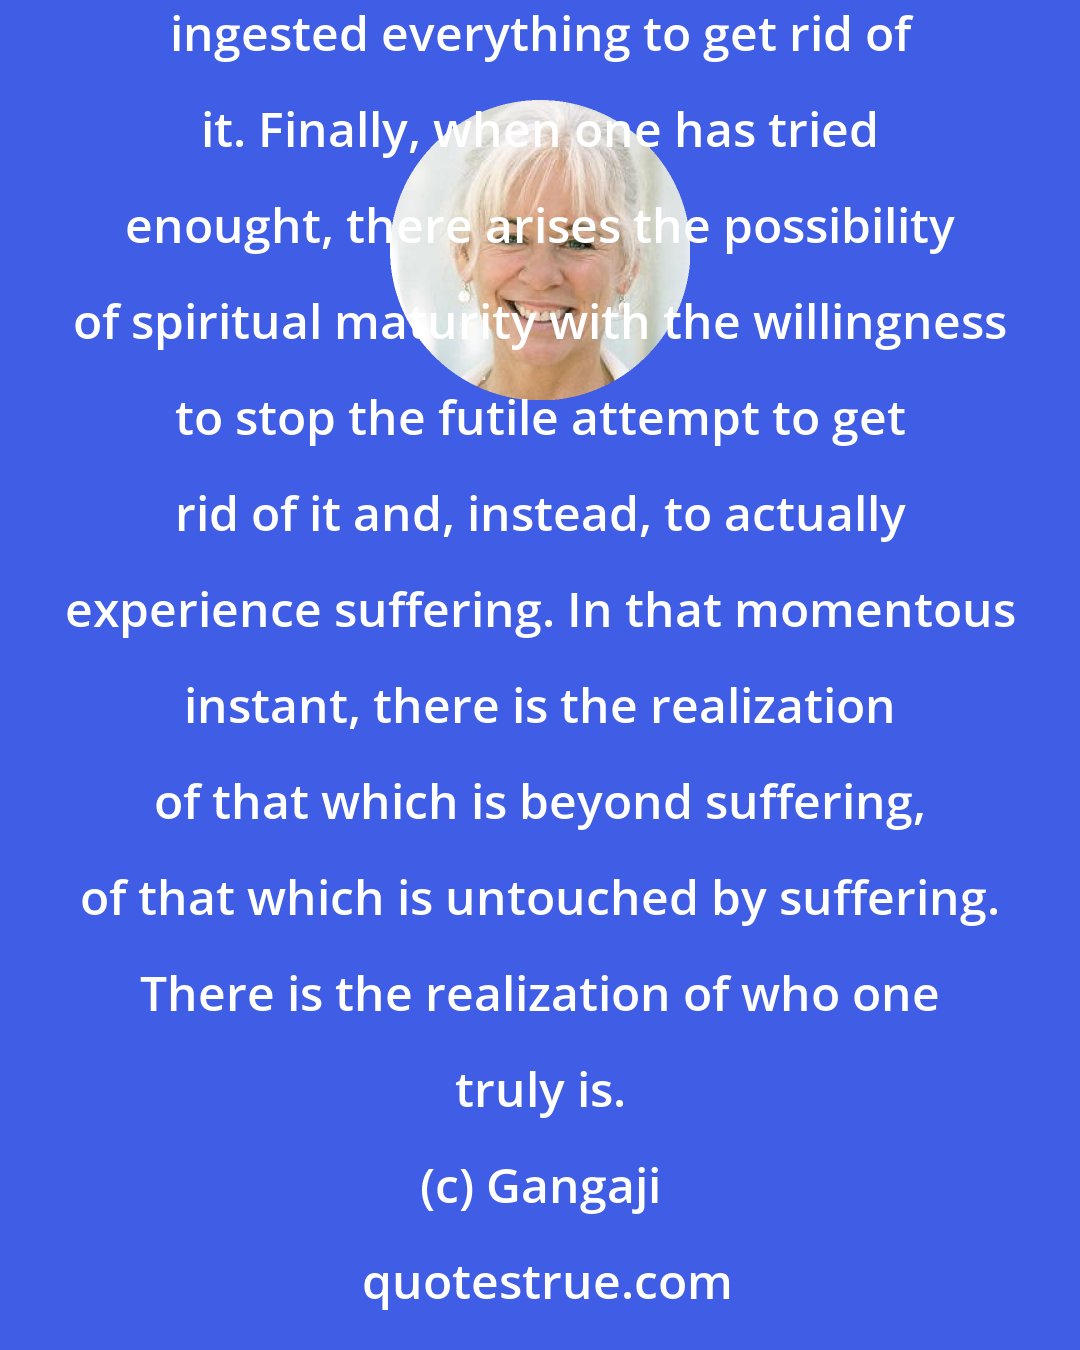 Gangaji: We have tried everything to get rid of suffering. We have gone everywhere to get rid of suffering. We have bought everything to get rid of it. We have ingested everything to get rid of it. Finally, when one has tried enought, there arises the possibility of spiritual maturity with the willingness to stop the futile attempt to get rid of it and, instead, to actually experience suffering. In that momentous instant, there is the realization of that which is beyond suffering, of that which is untouched by suffering. There is the realization of who one truly is.